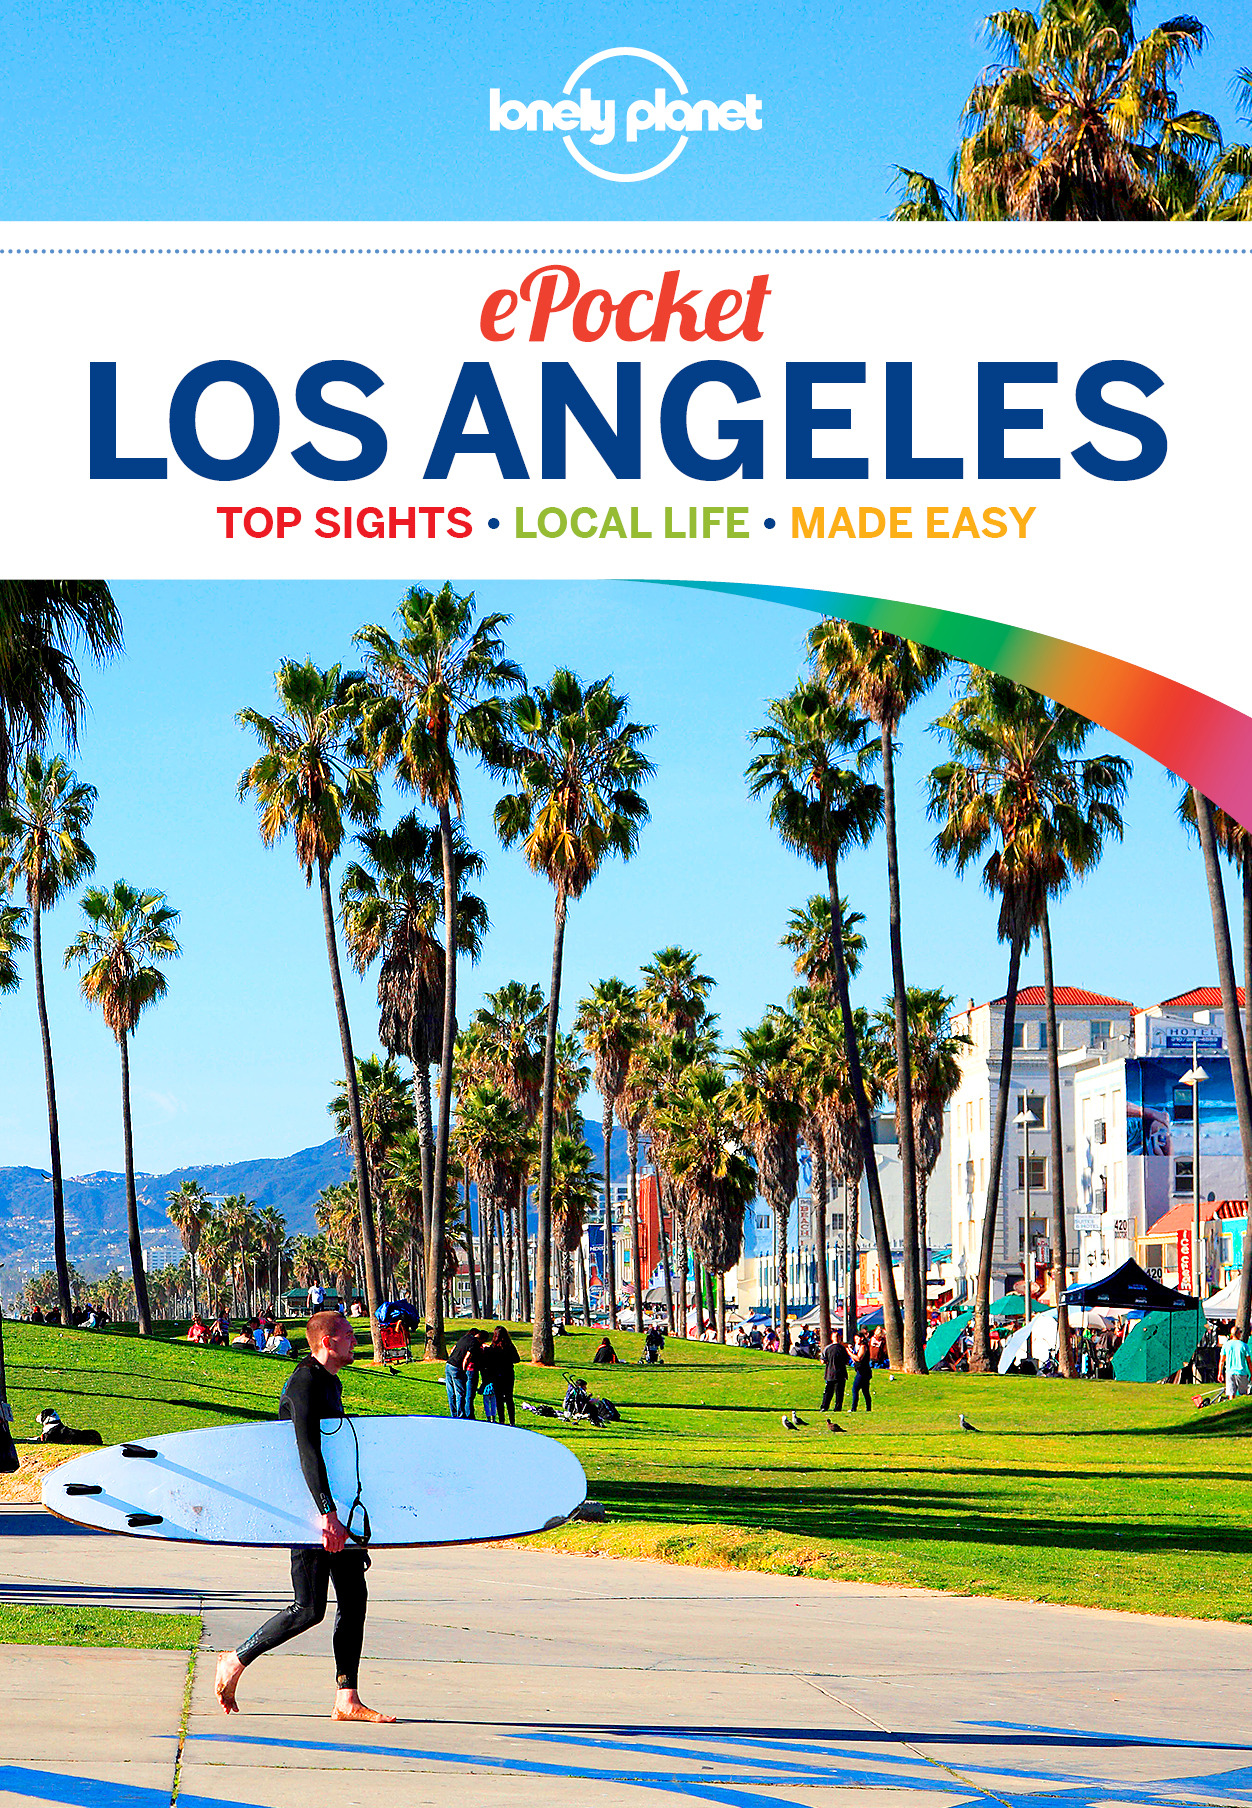 Planet, Lonely - Lonely Planet Pocket Los Angeles, e-bok